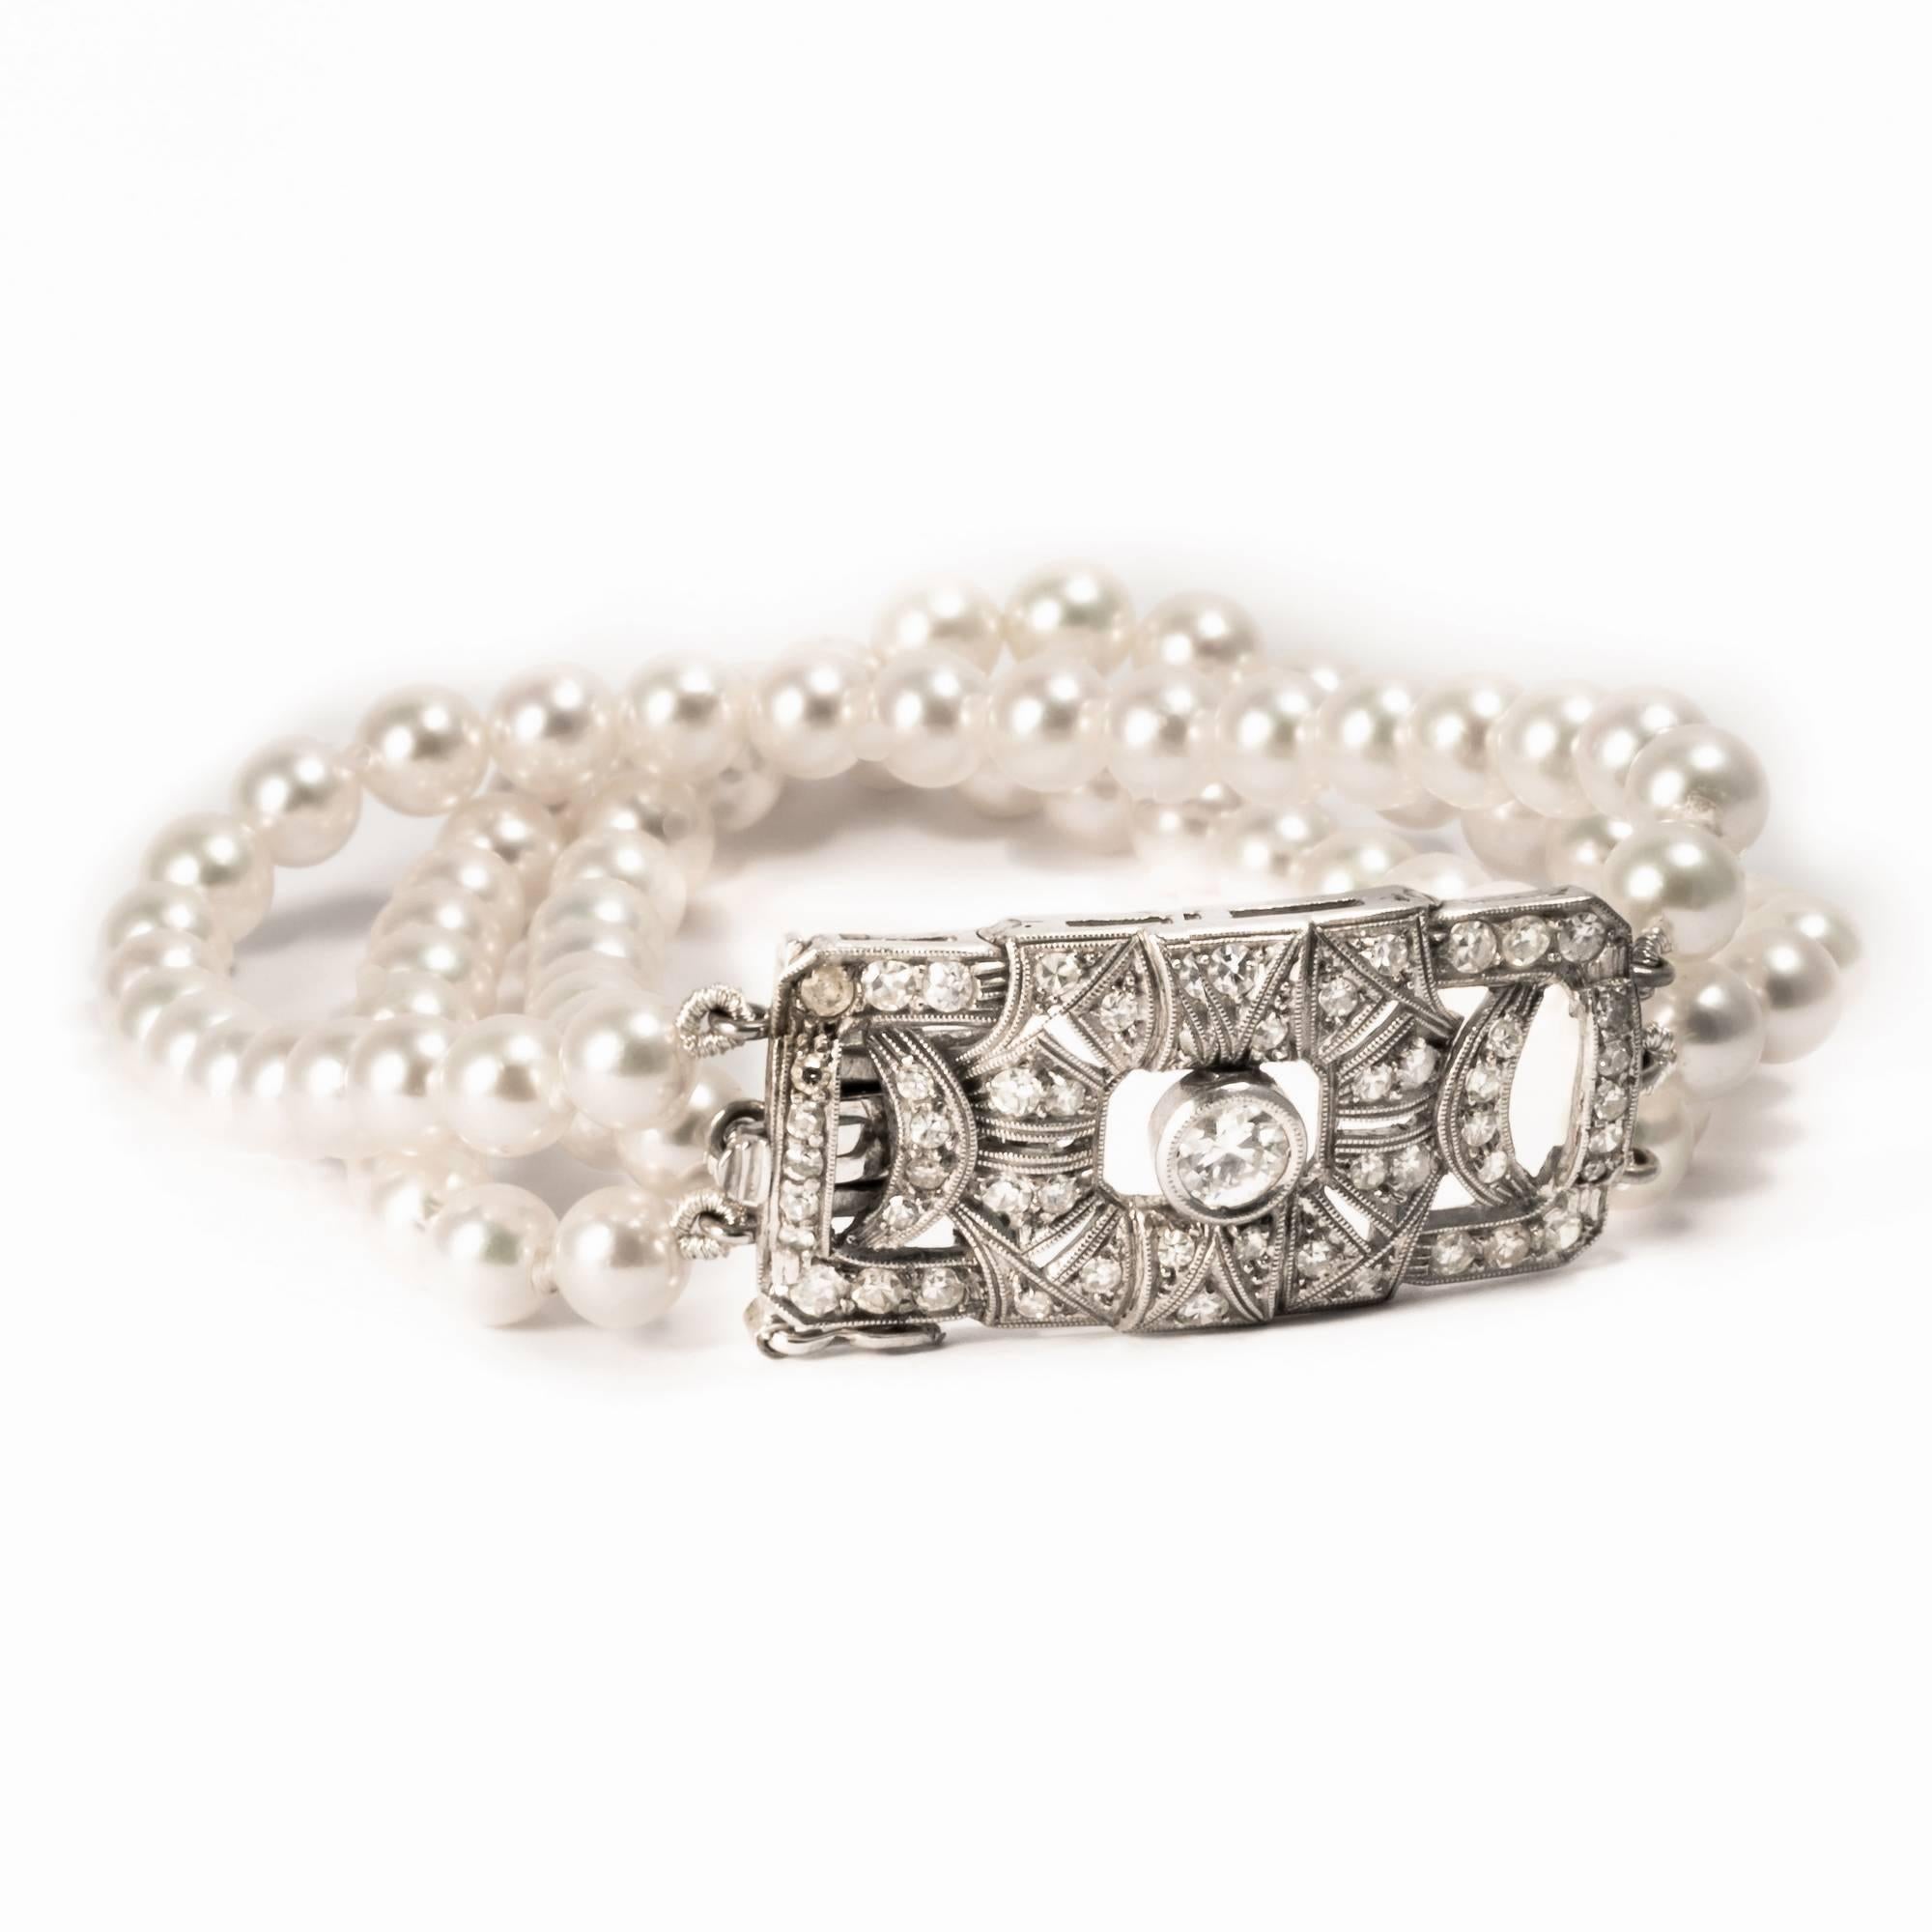 1920 Art Deco bangle shows a rectangular element made in white gold  featuring 1 diamond of approximately 0.20 carats and smaller diamonds. Deco design comes alive thank to the milgrain and to the 3 pearl threads that enlighten this bracelet.
Actual